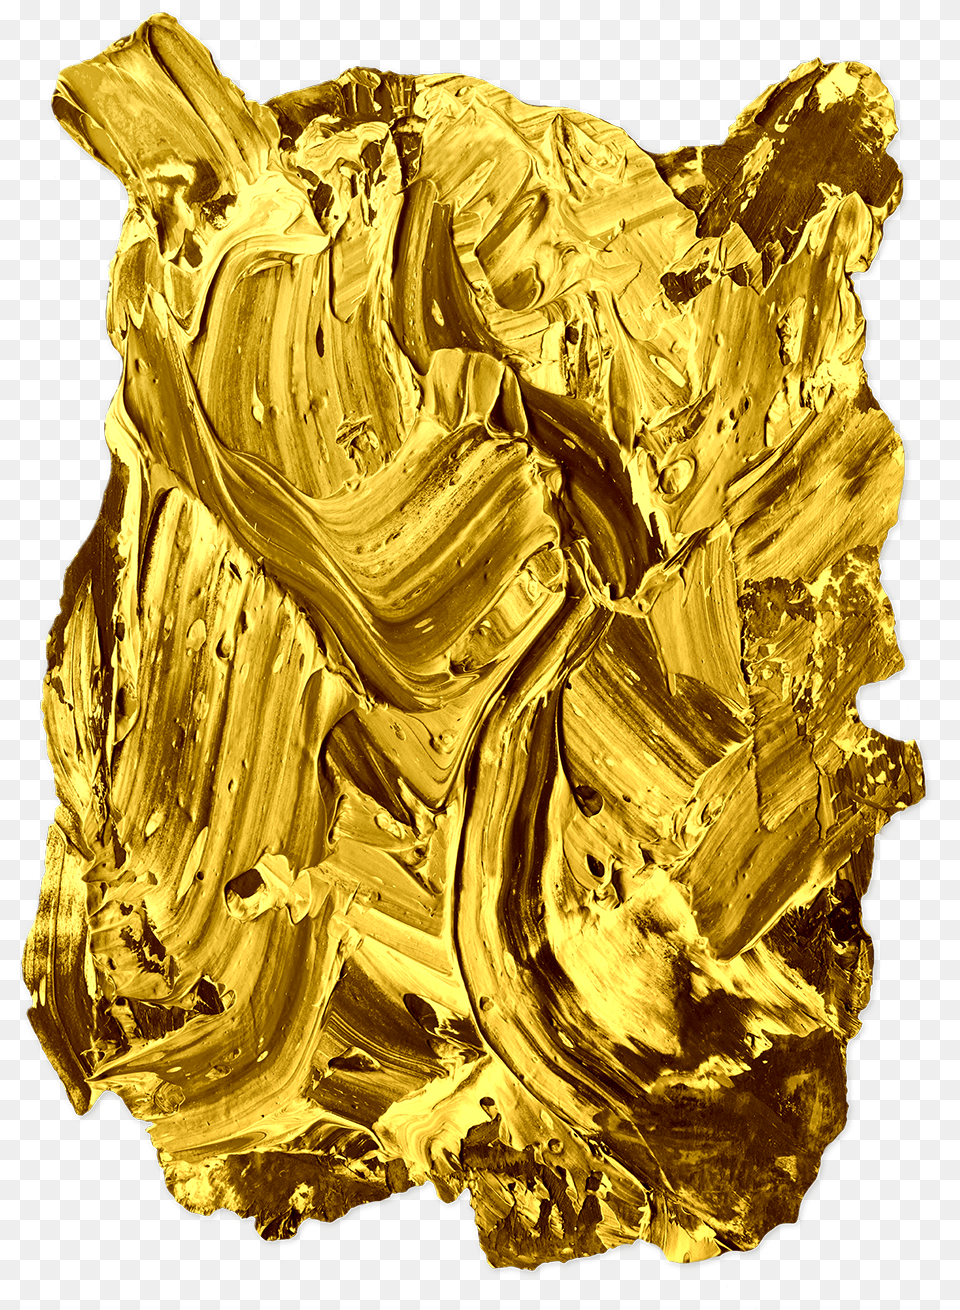 Golden Paint Robust Nature Painting Texture Paint, Gold, Mineral, Treasure, Adult Png Image